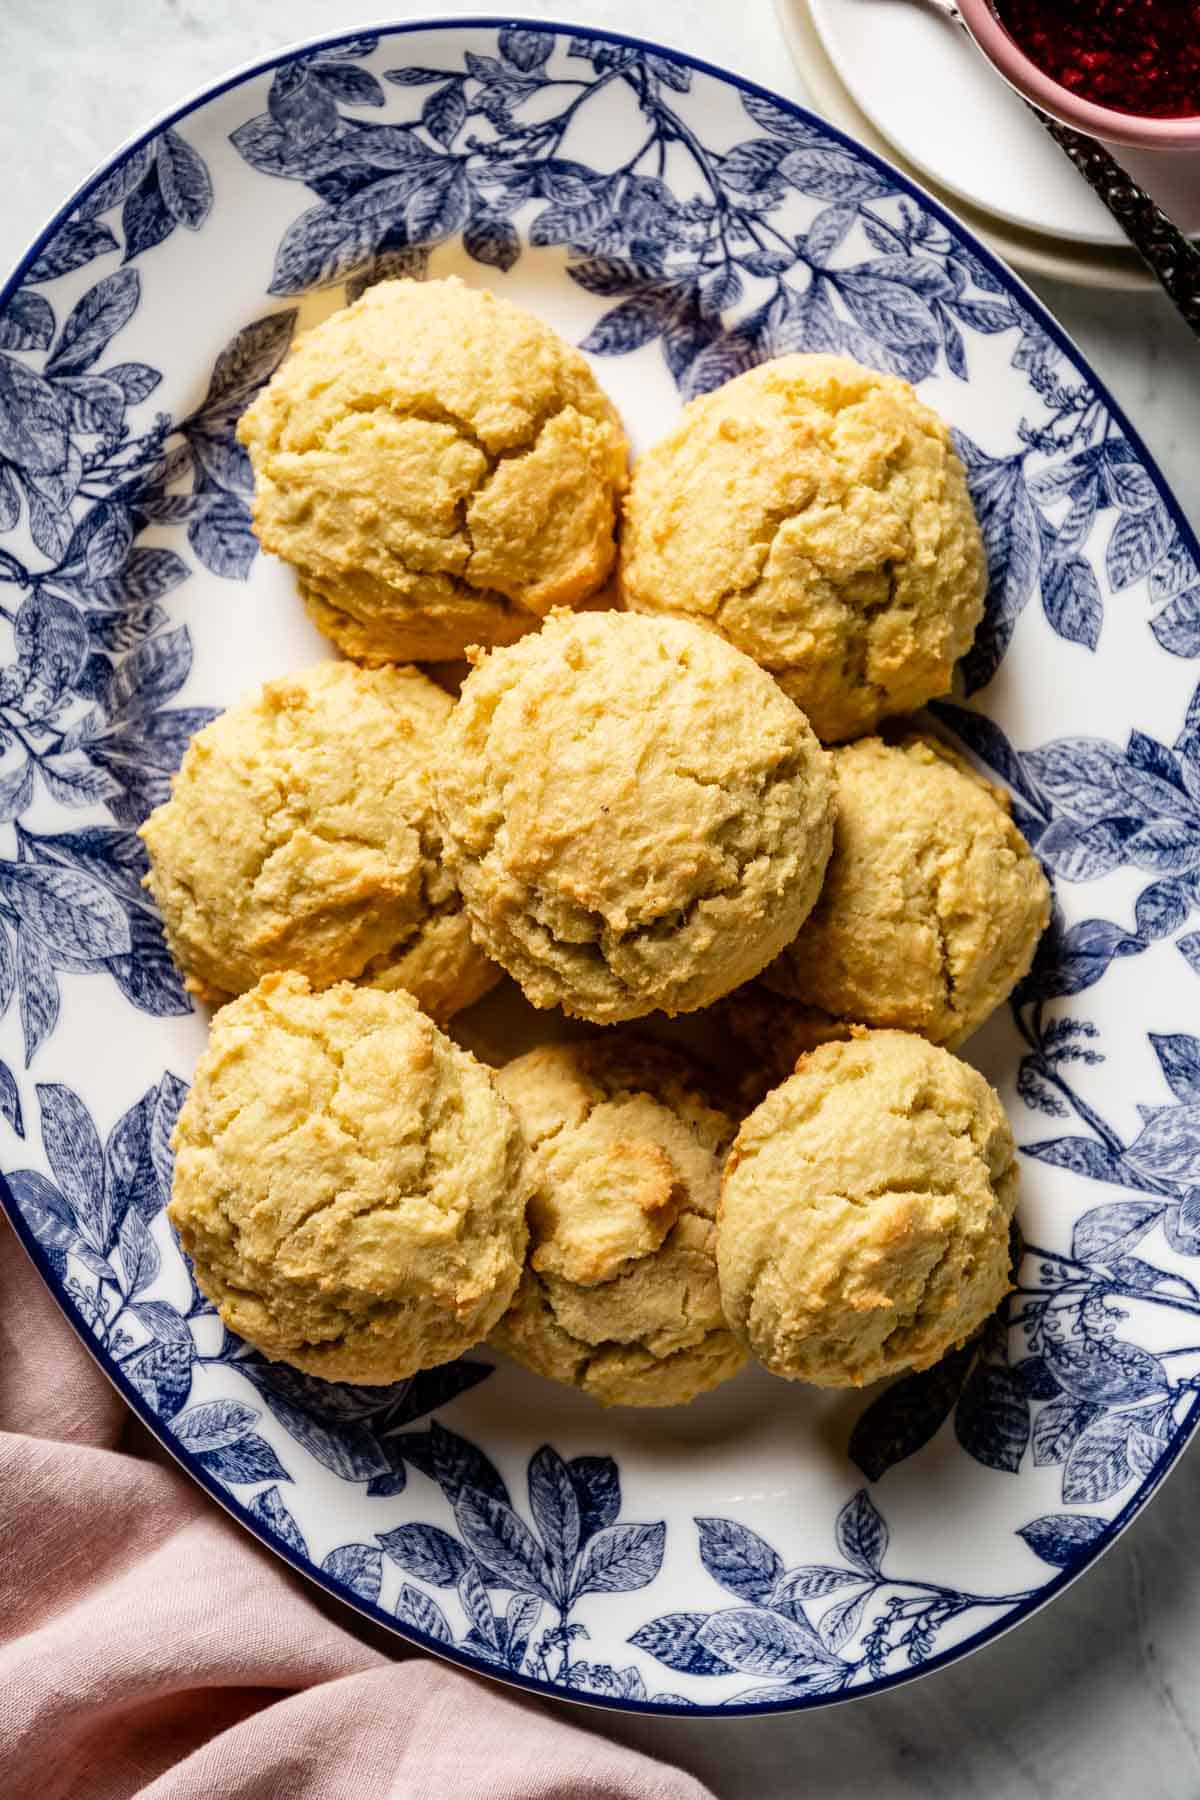 grain free biscuits with almond flour are on a plate from the top view